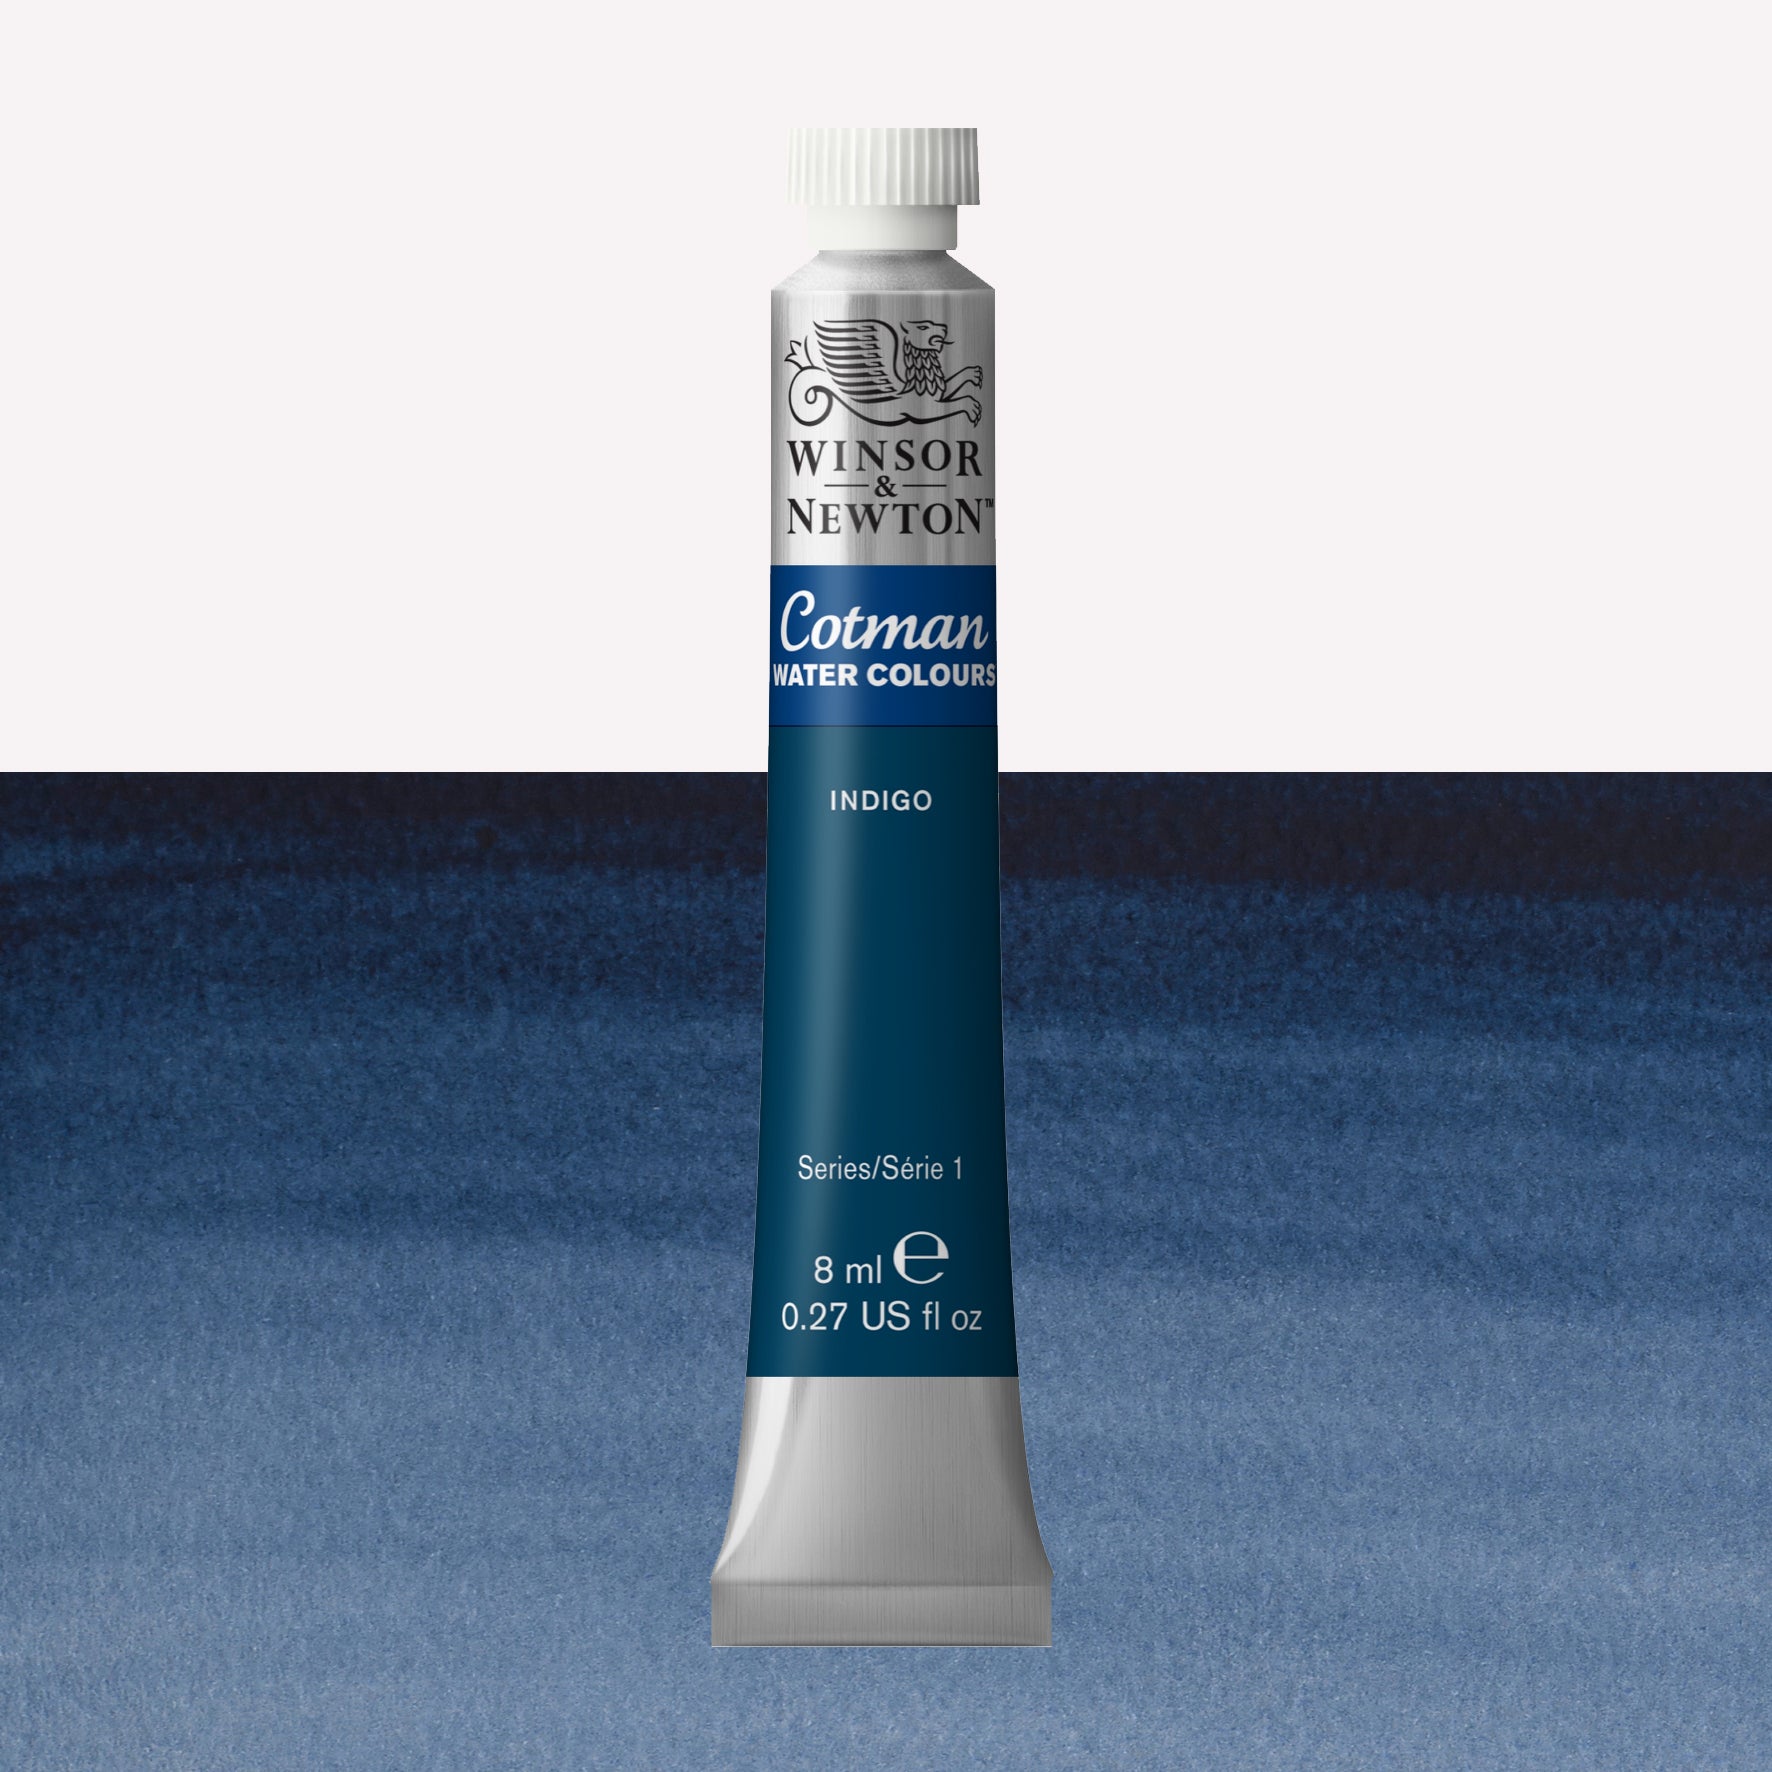 Winsor & Newton Cotman watercolour paint packaged in 8ml silver tube with a white lid in the shade Indigo over a highly pigmented colour swatch.